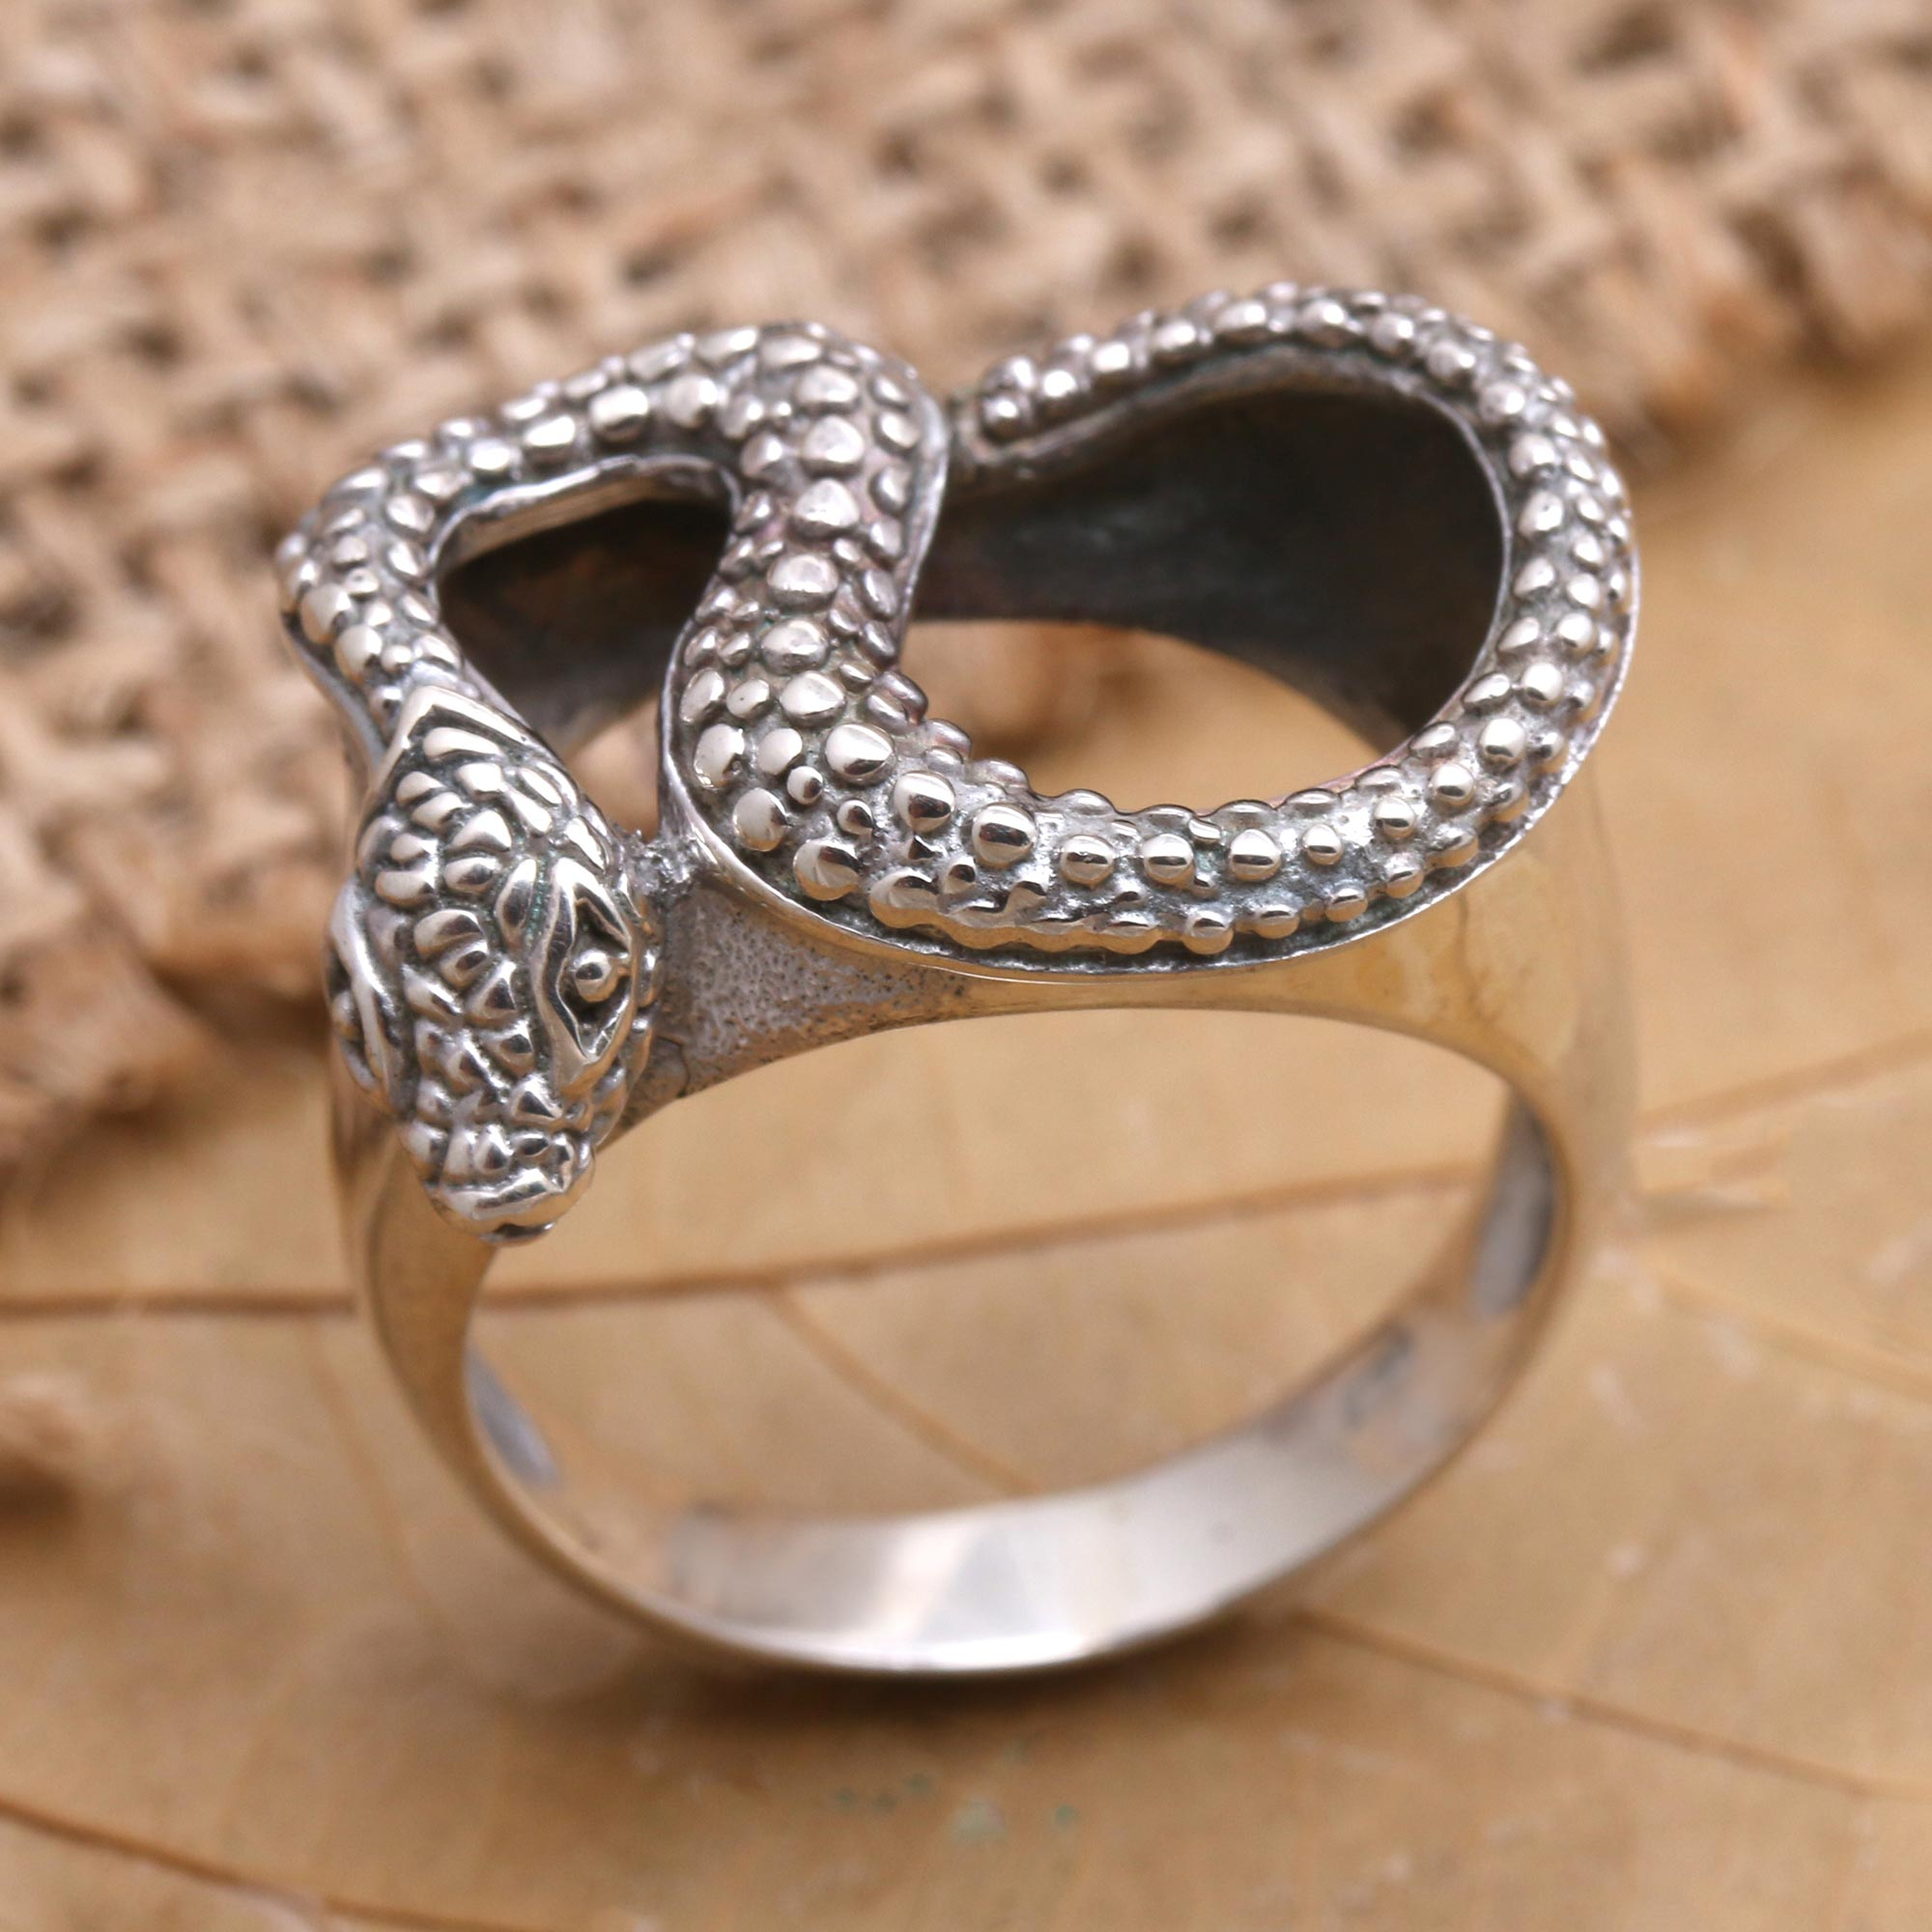 Buy PS CREATION Stainless Steel Gothic Snake Rings, Vintage Retro Serpent  Rings, Can Engrave, Silver Plated Snake Ring at Amazon.in